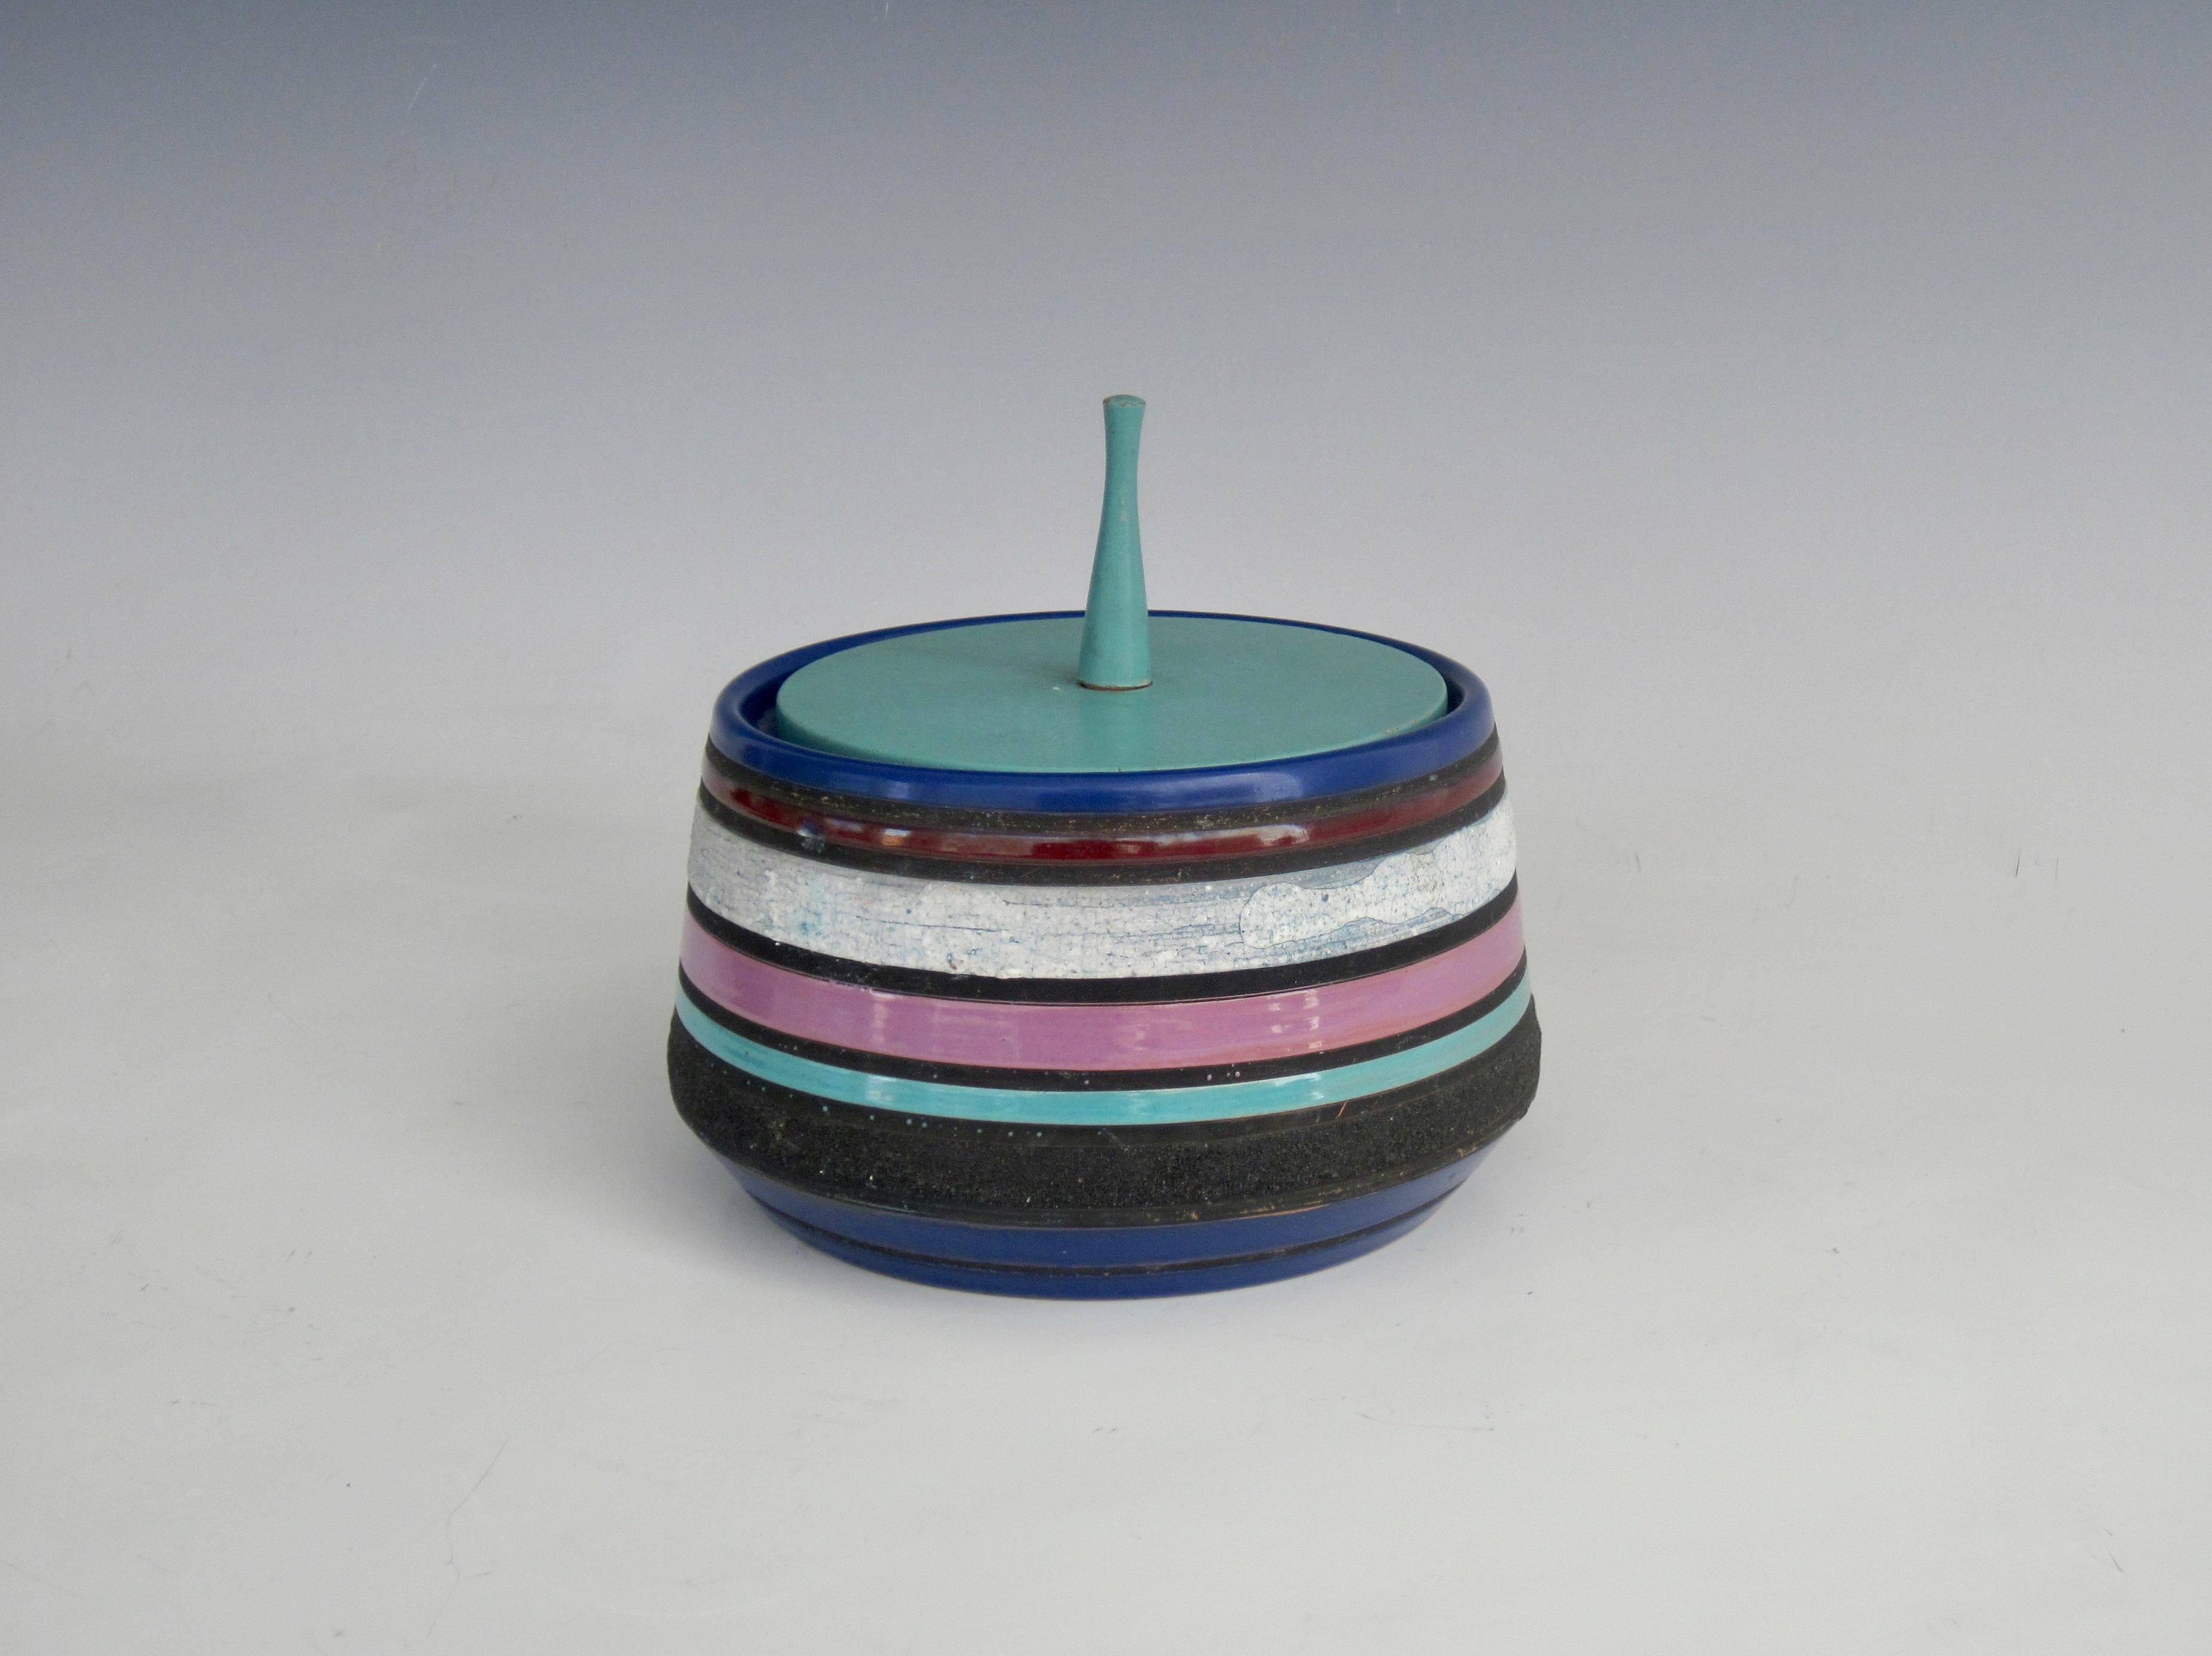 Aldo Londi for Bitossi Cambogia Series jar with alternating horizontal stripes of various glazes and textures with an aqua painted wooden lid. From the 1950s. The last photo shows it paired with a tall cylindrical vase from the same Cambogia Series